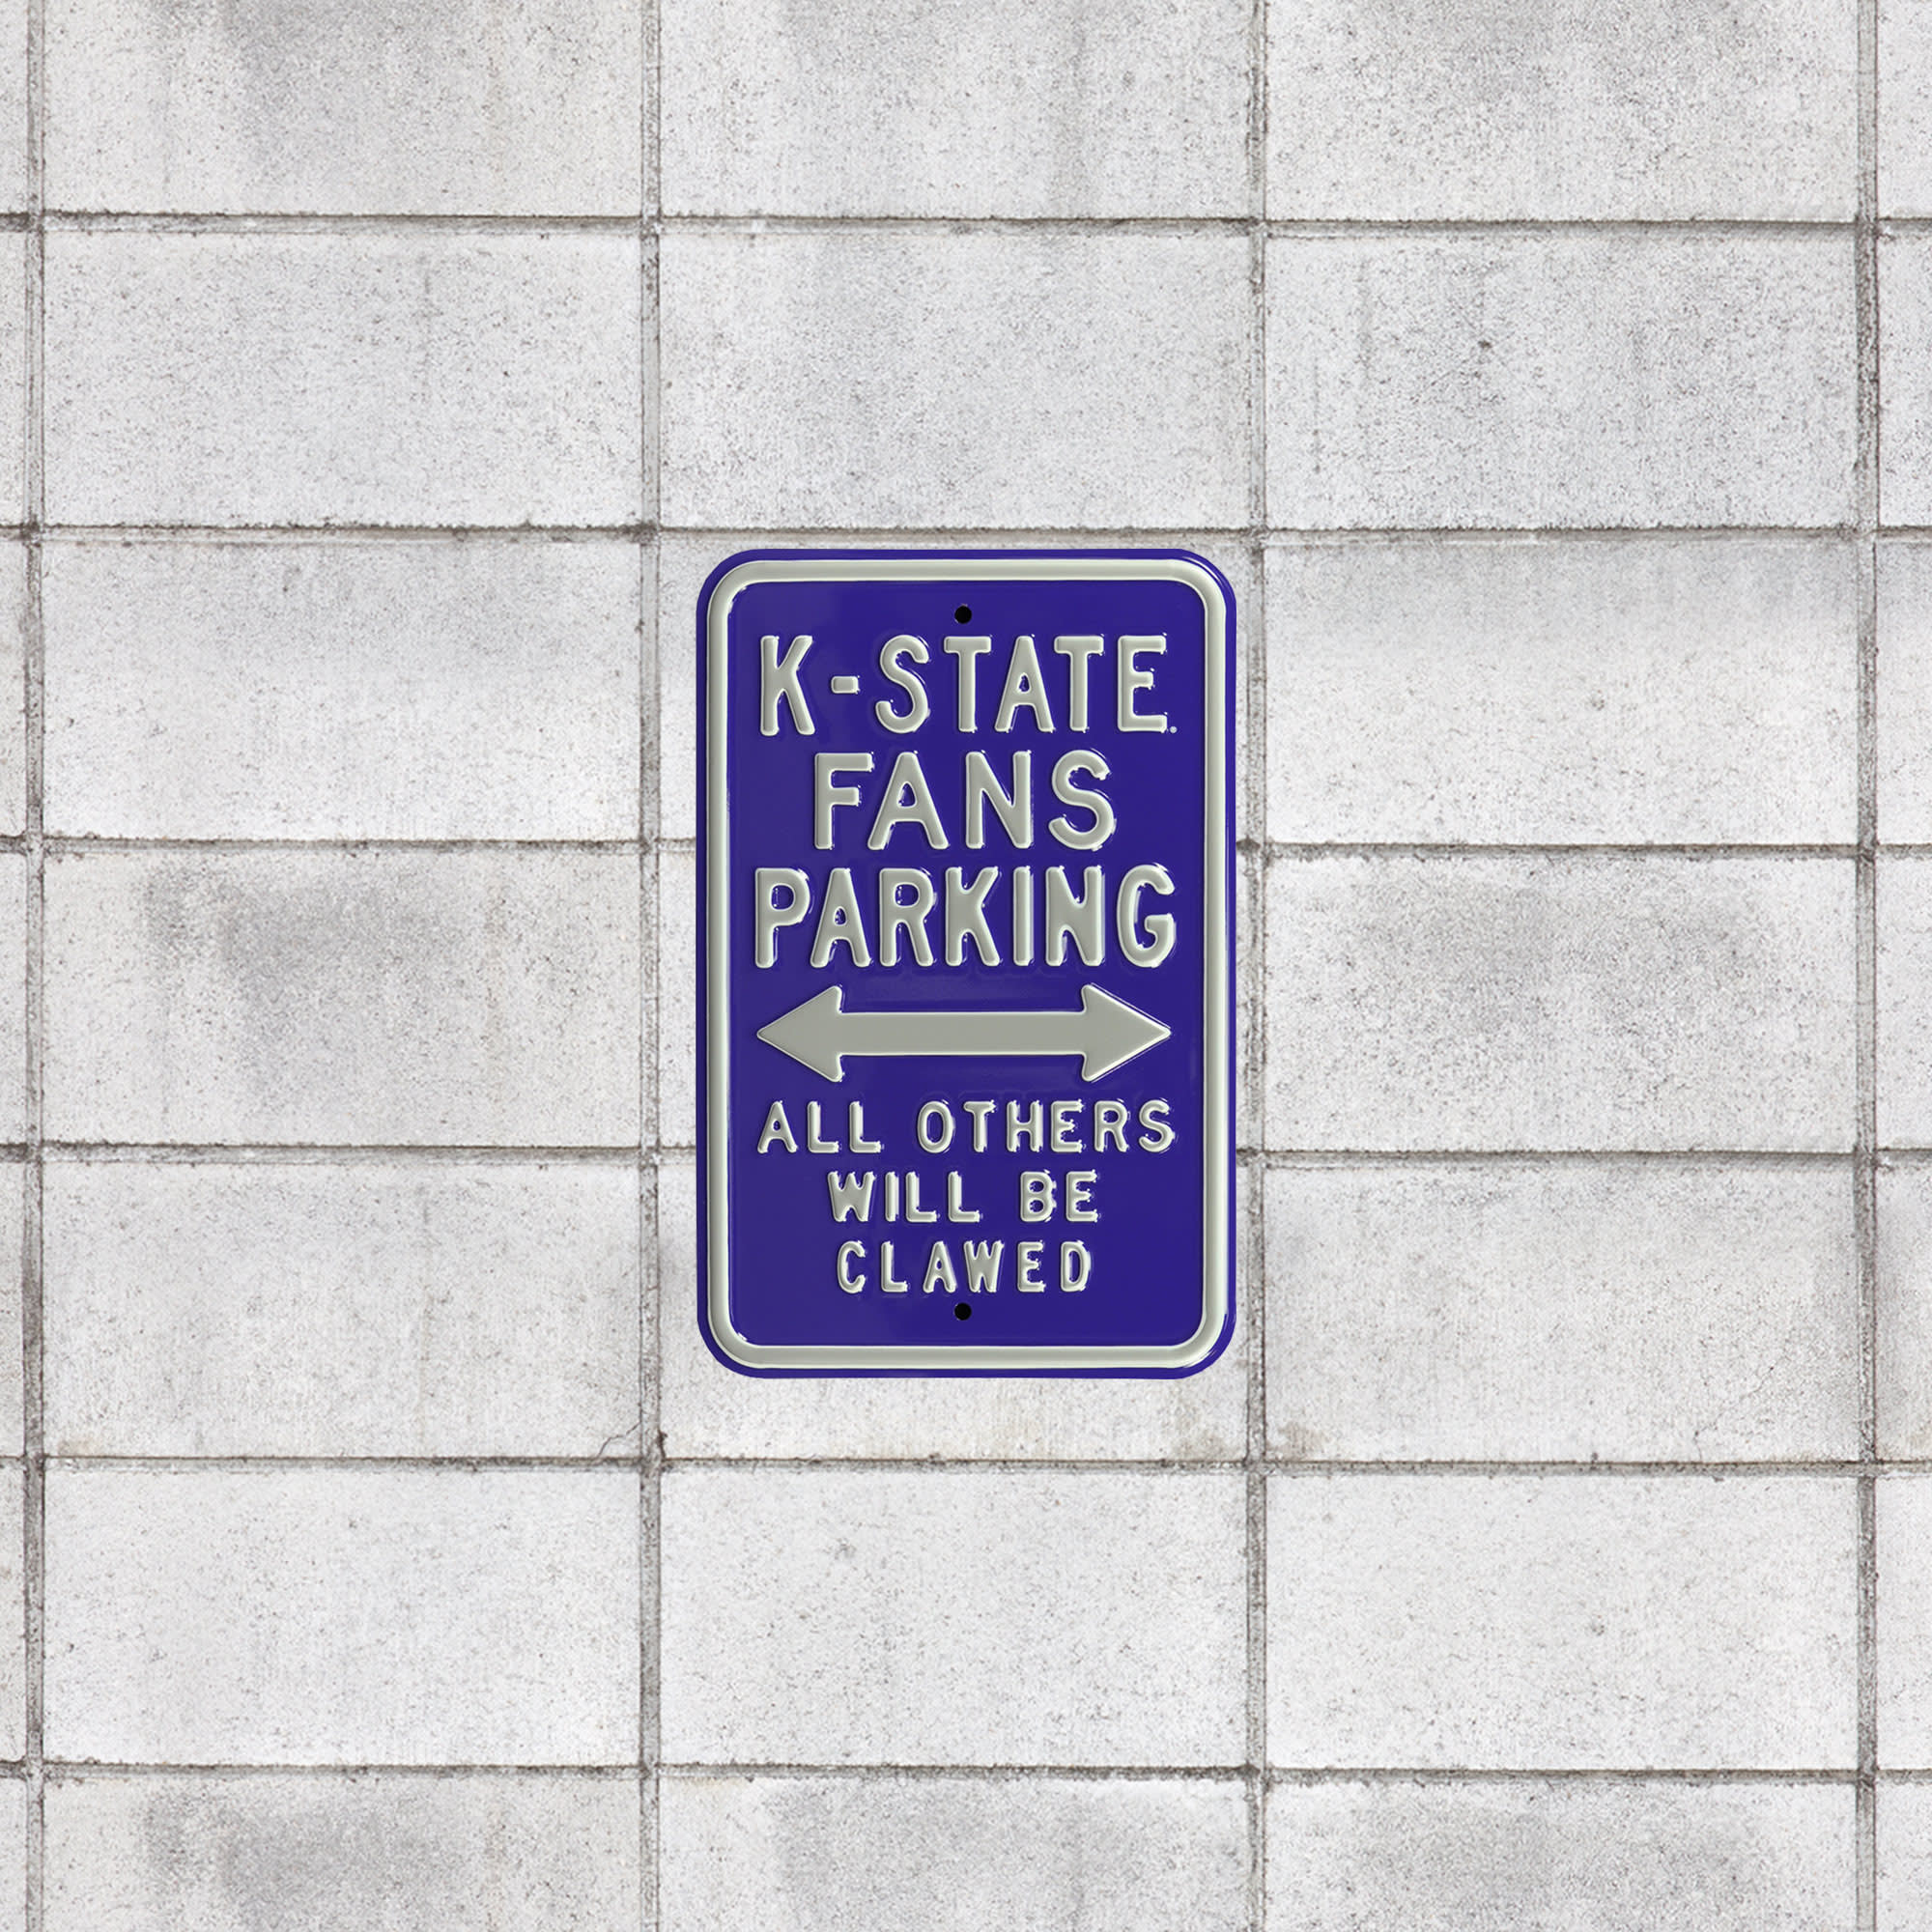 Kansas State Wildcats: KU Go Home Parking - Officially Licensed Metal Street Sign 18.0"W x 12.0"H by Fathead | 100% Steel